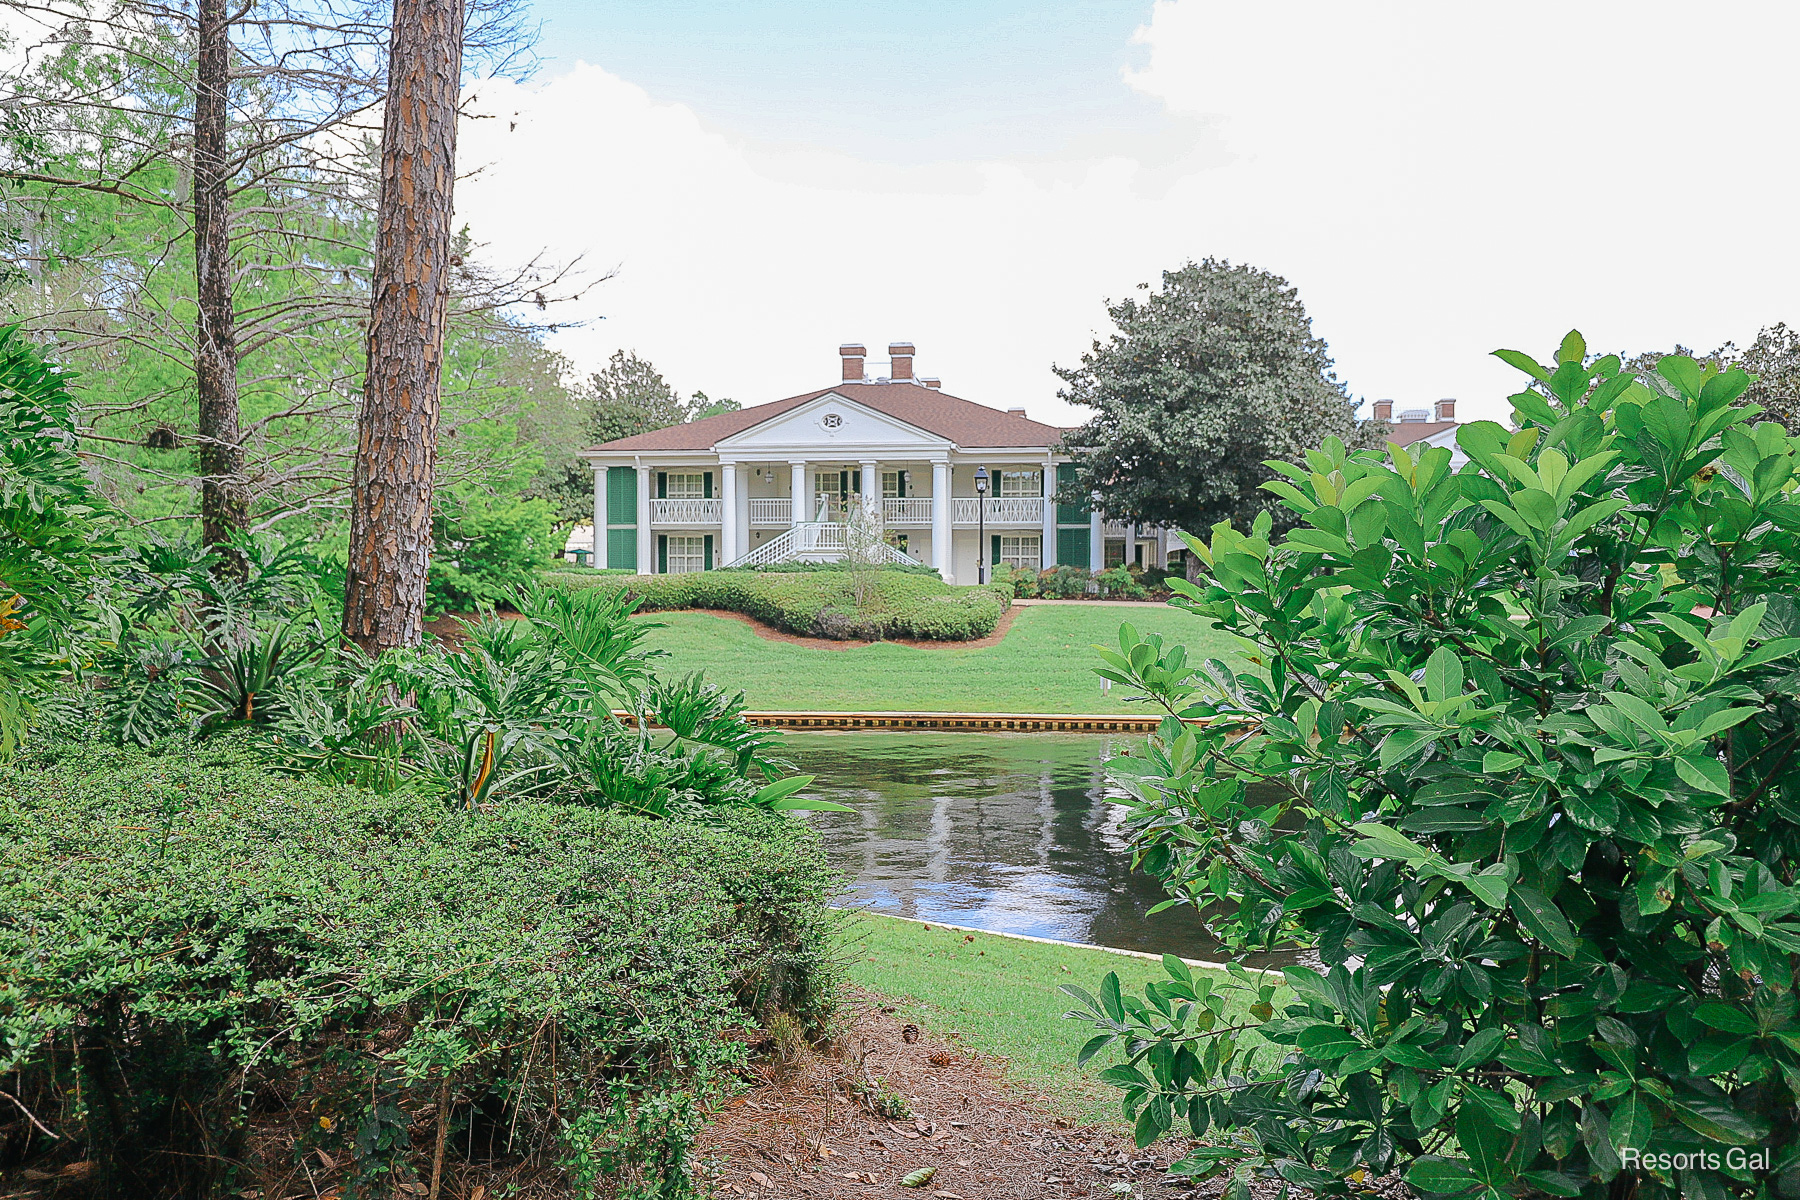 a view of Magnolia Terrace from across the river 